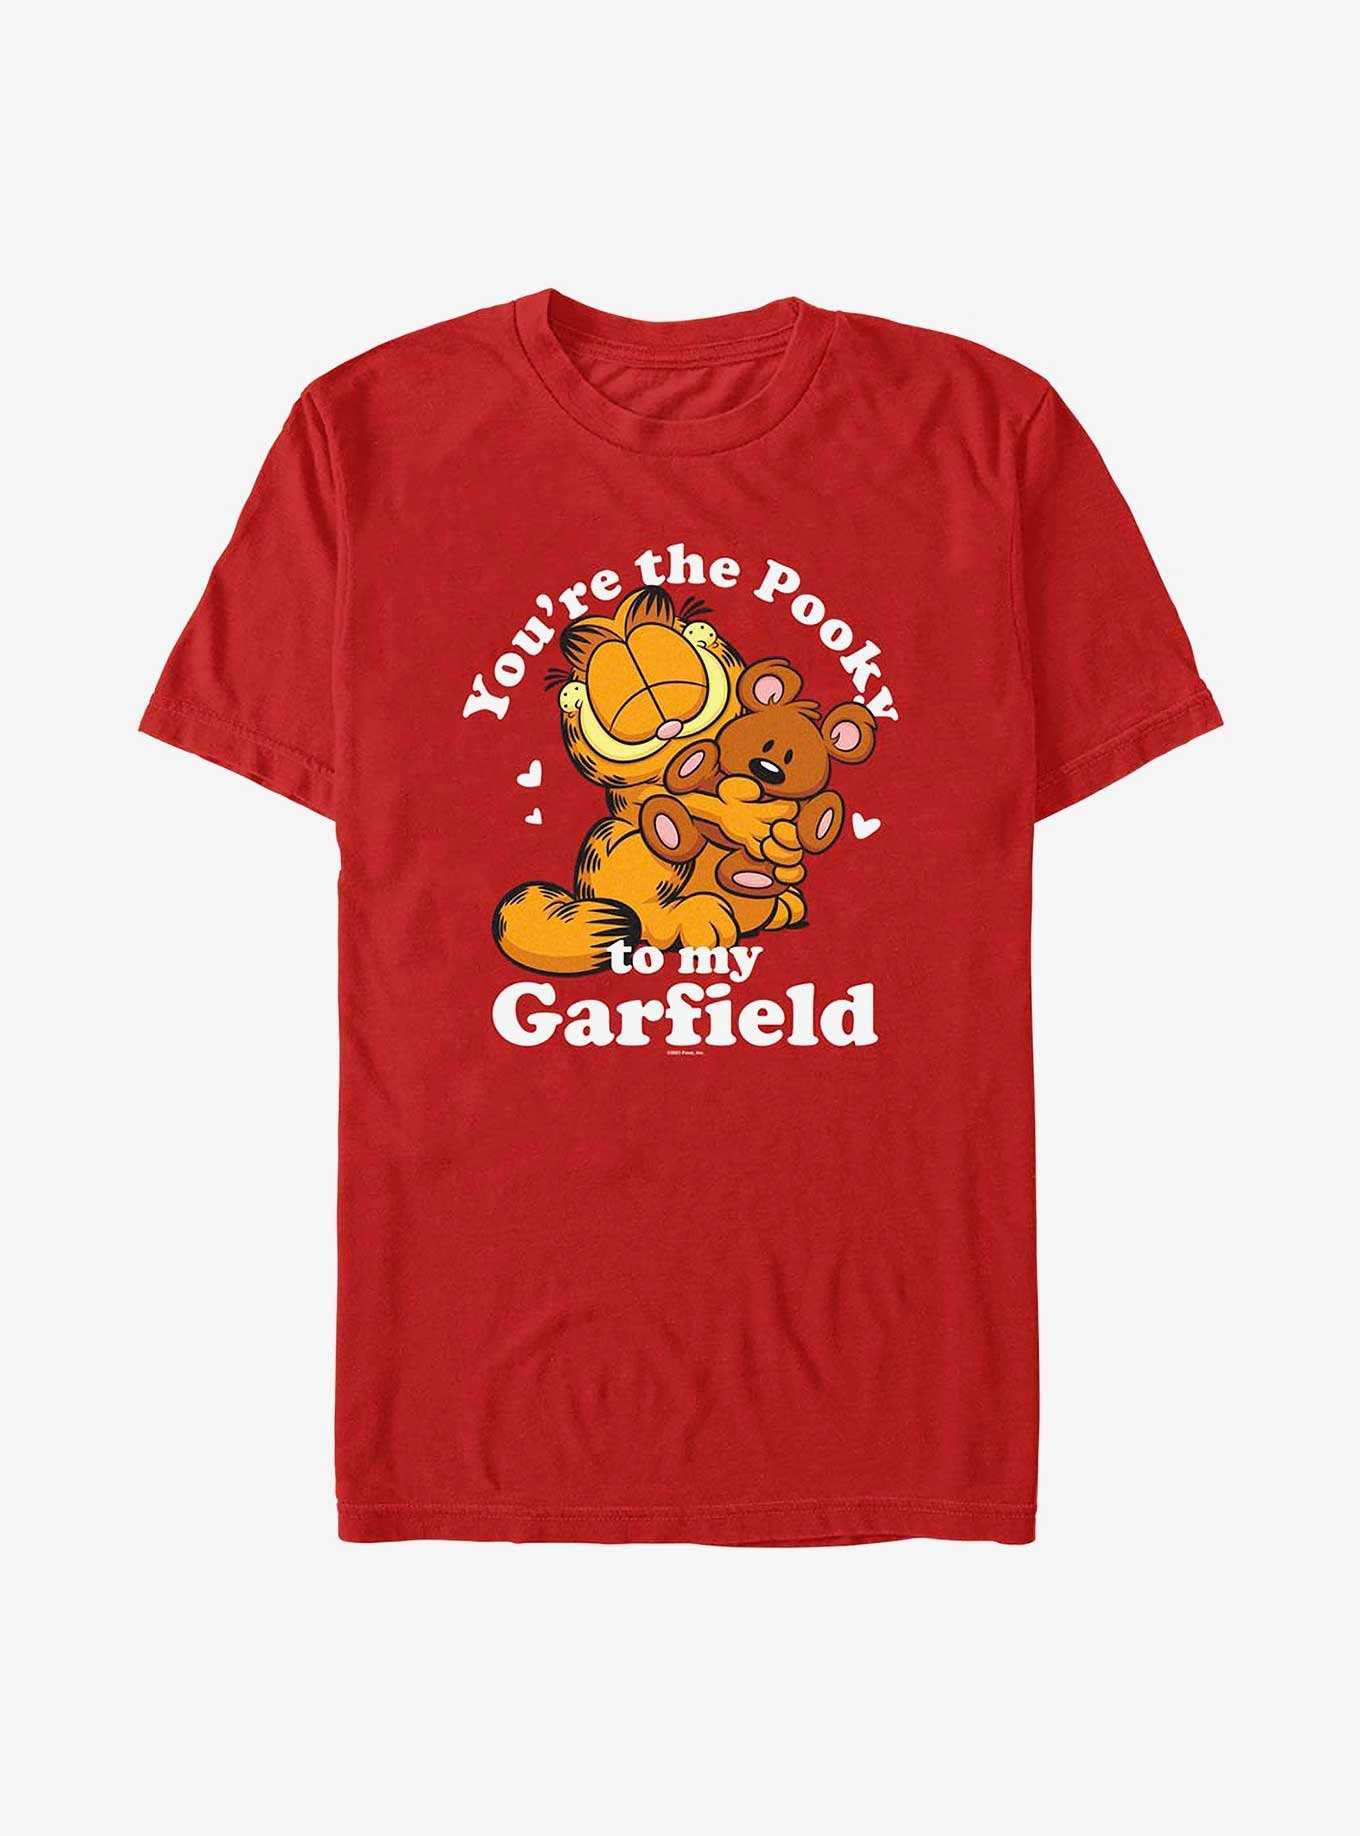 Garfield You're My Pooky T-Shirt, , hi-res